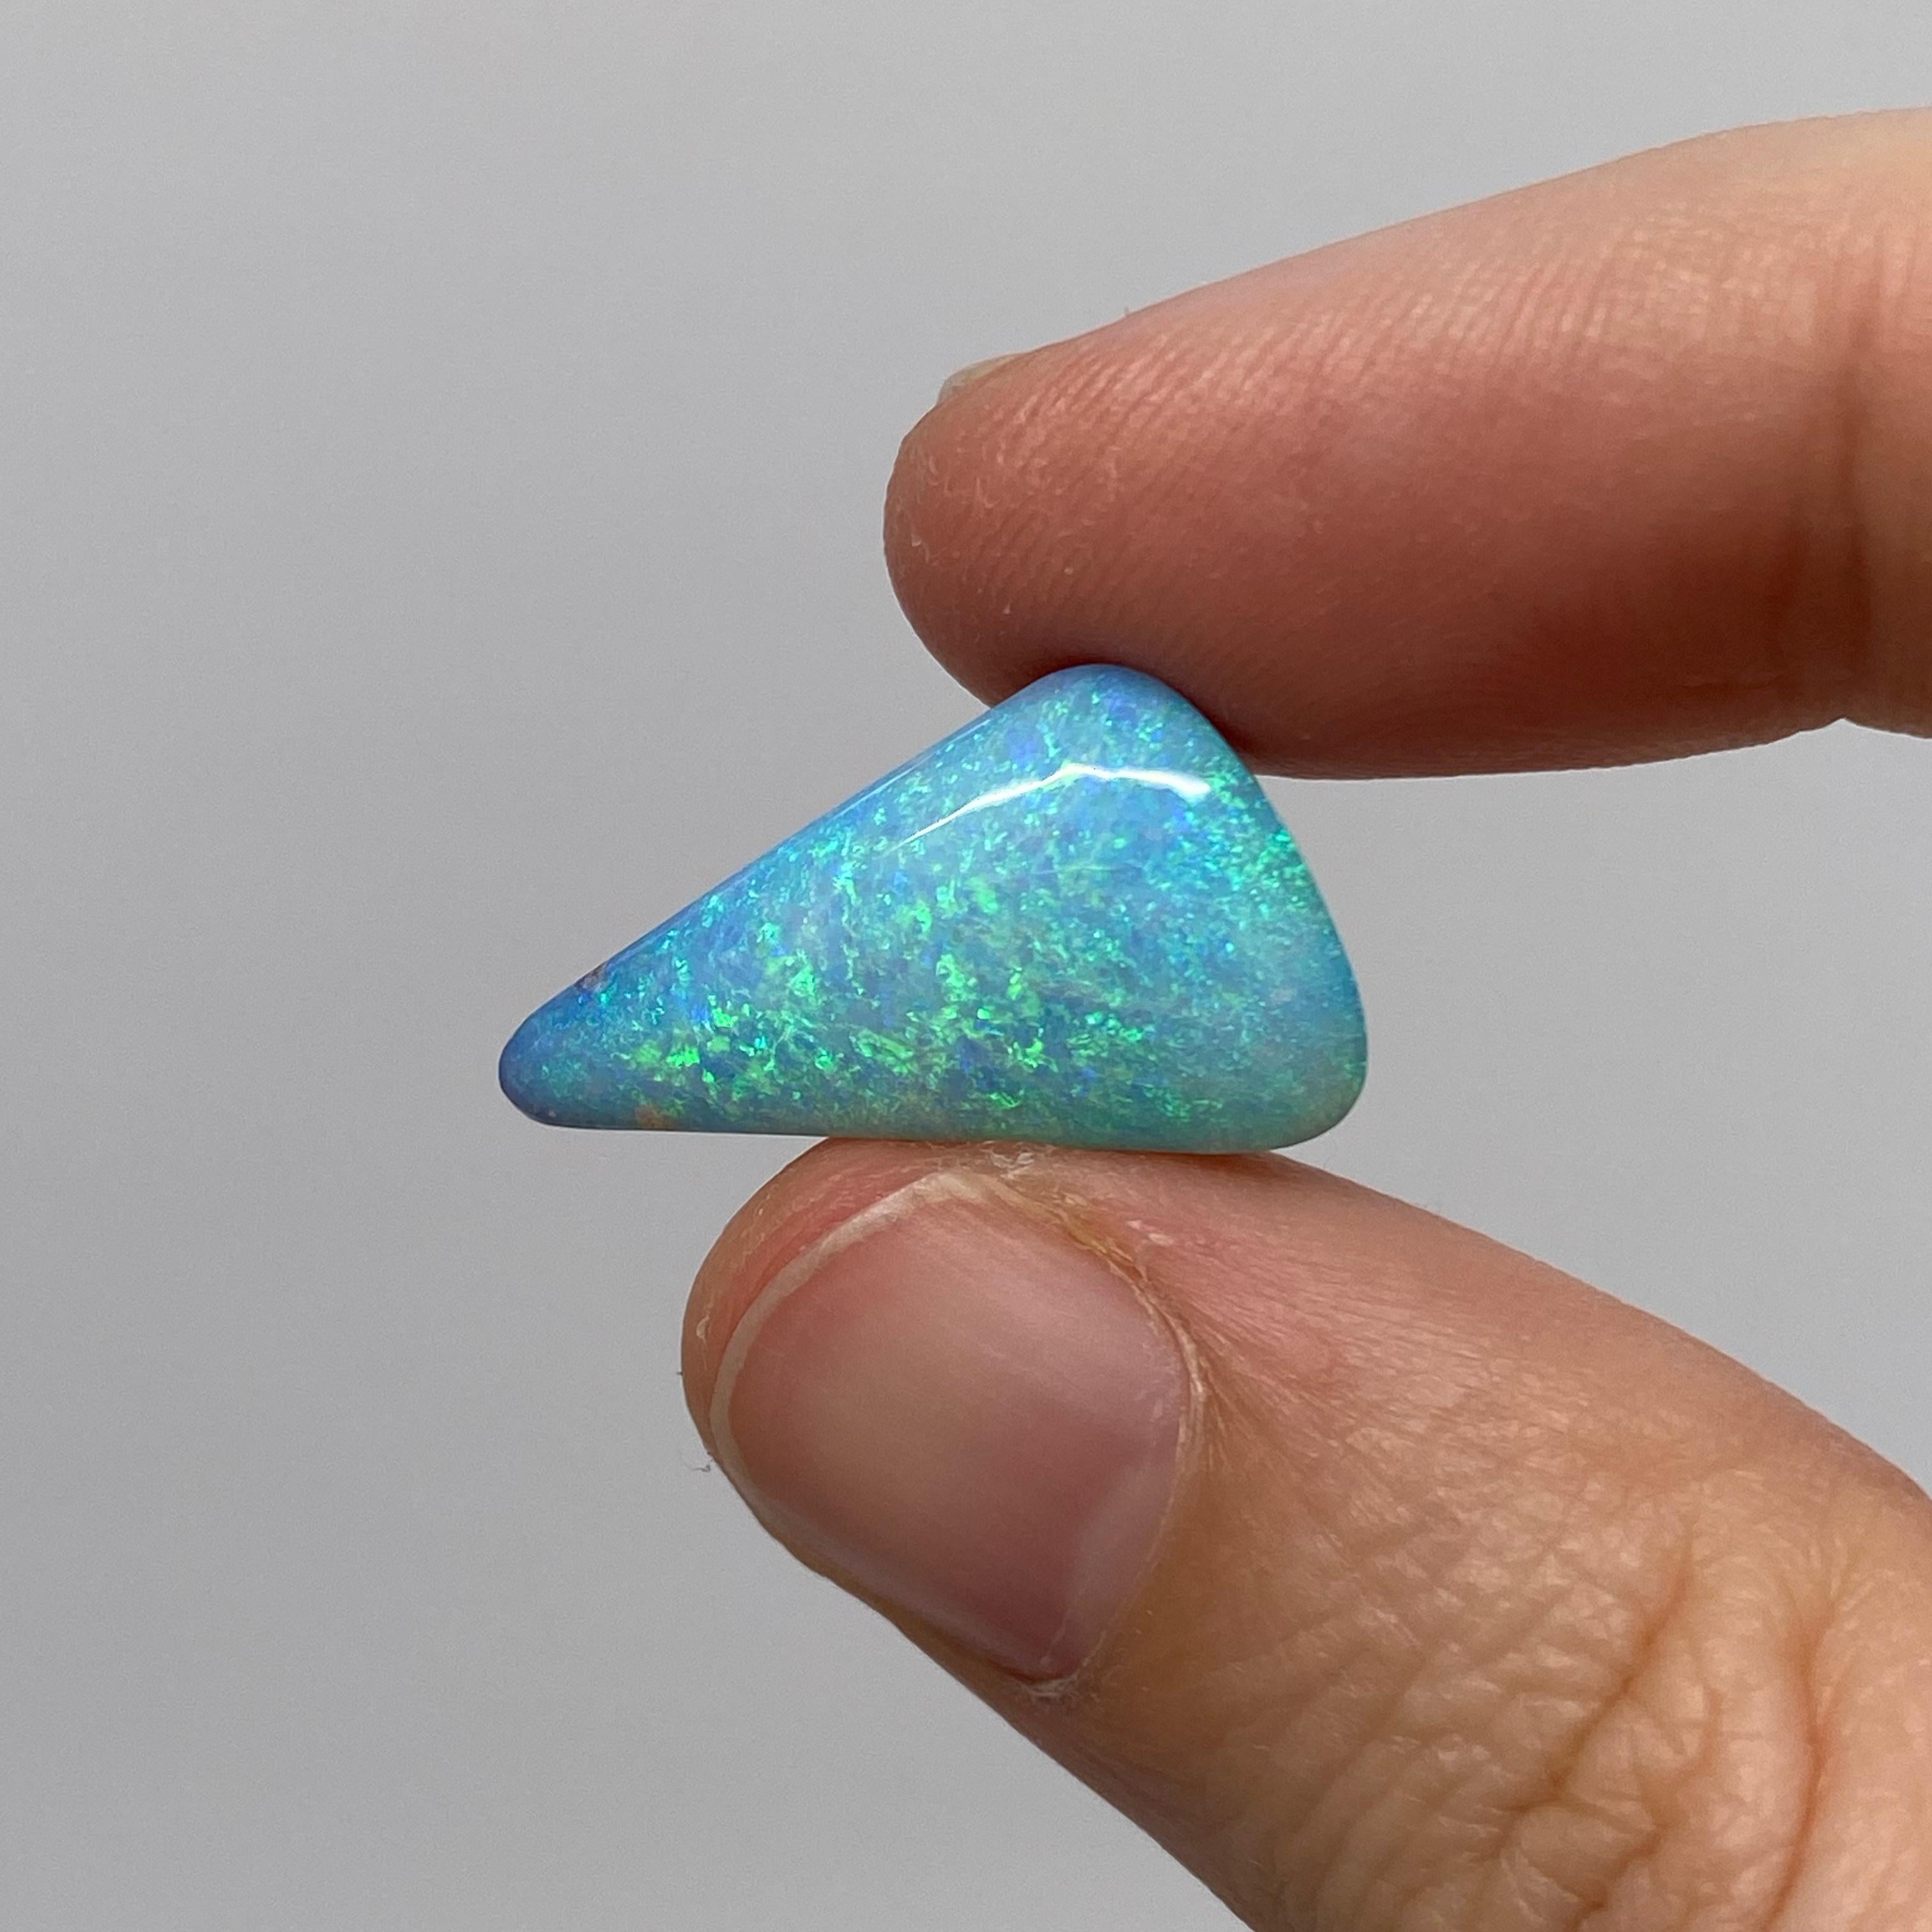 This free-form natural solid Australian boulder opal was mined in western Queensland, Australia by a female opal miner. It has gorgeous tropical ocean colors that include turquoise and aquamarine. It is very bright and has a lighter (N7) body tone